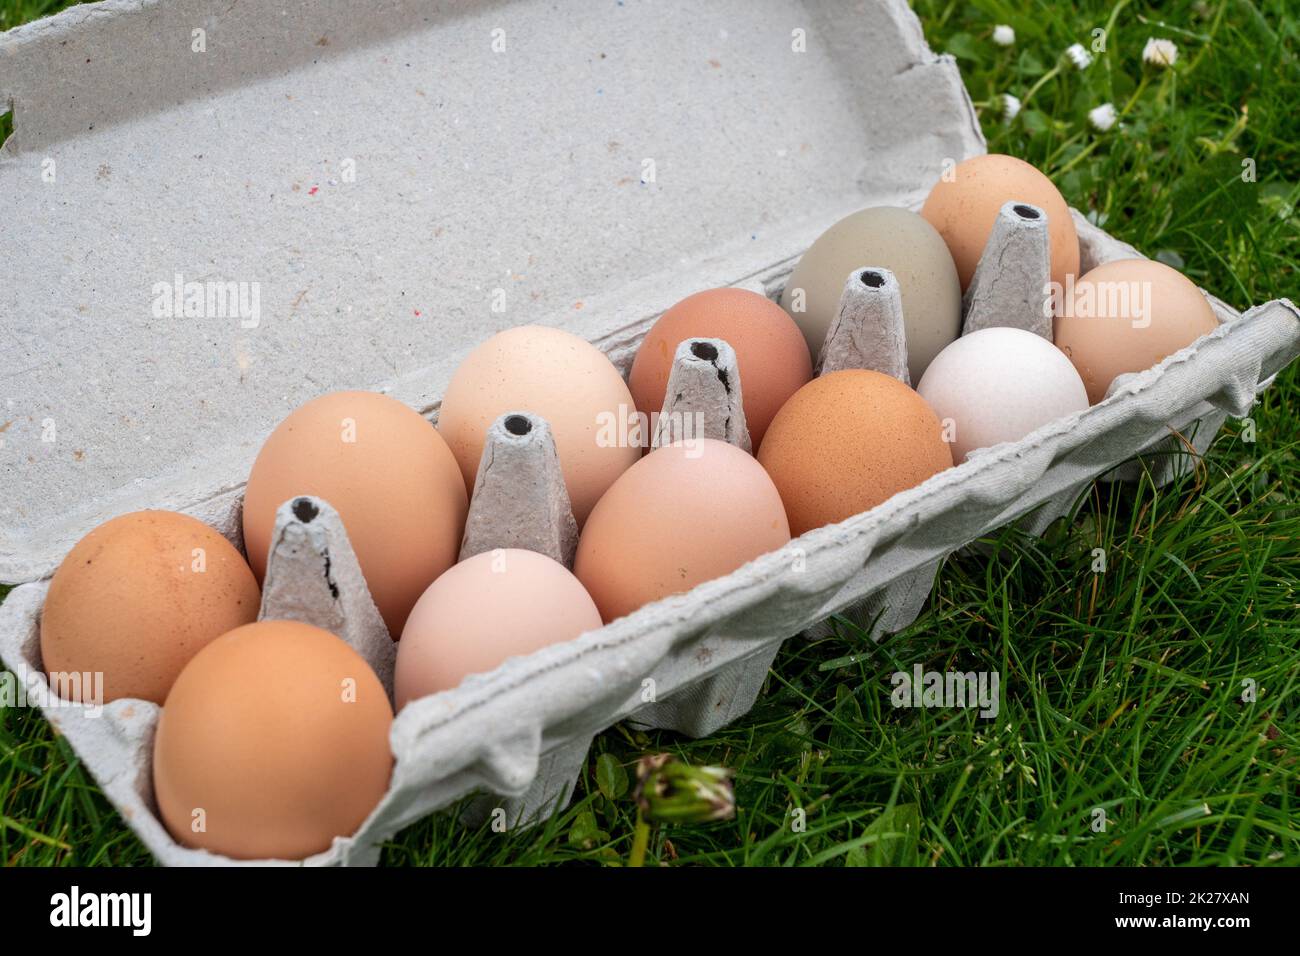 Carton container with chicken eggs on the grass Stock Photo